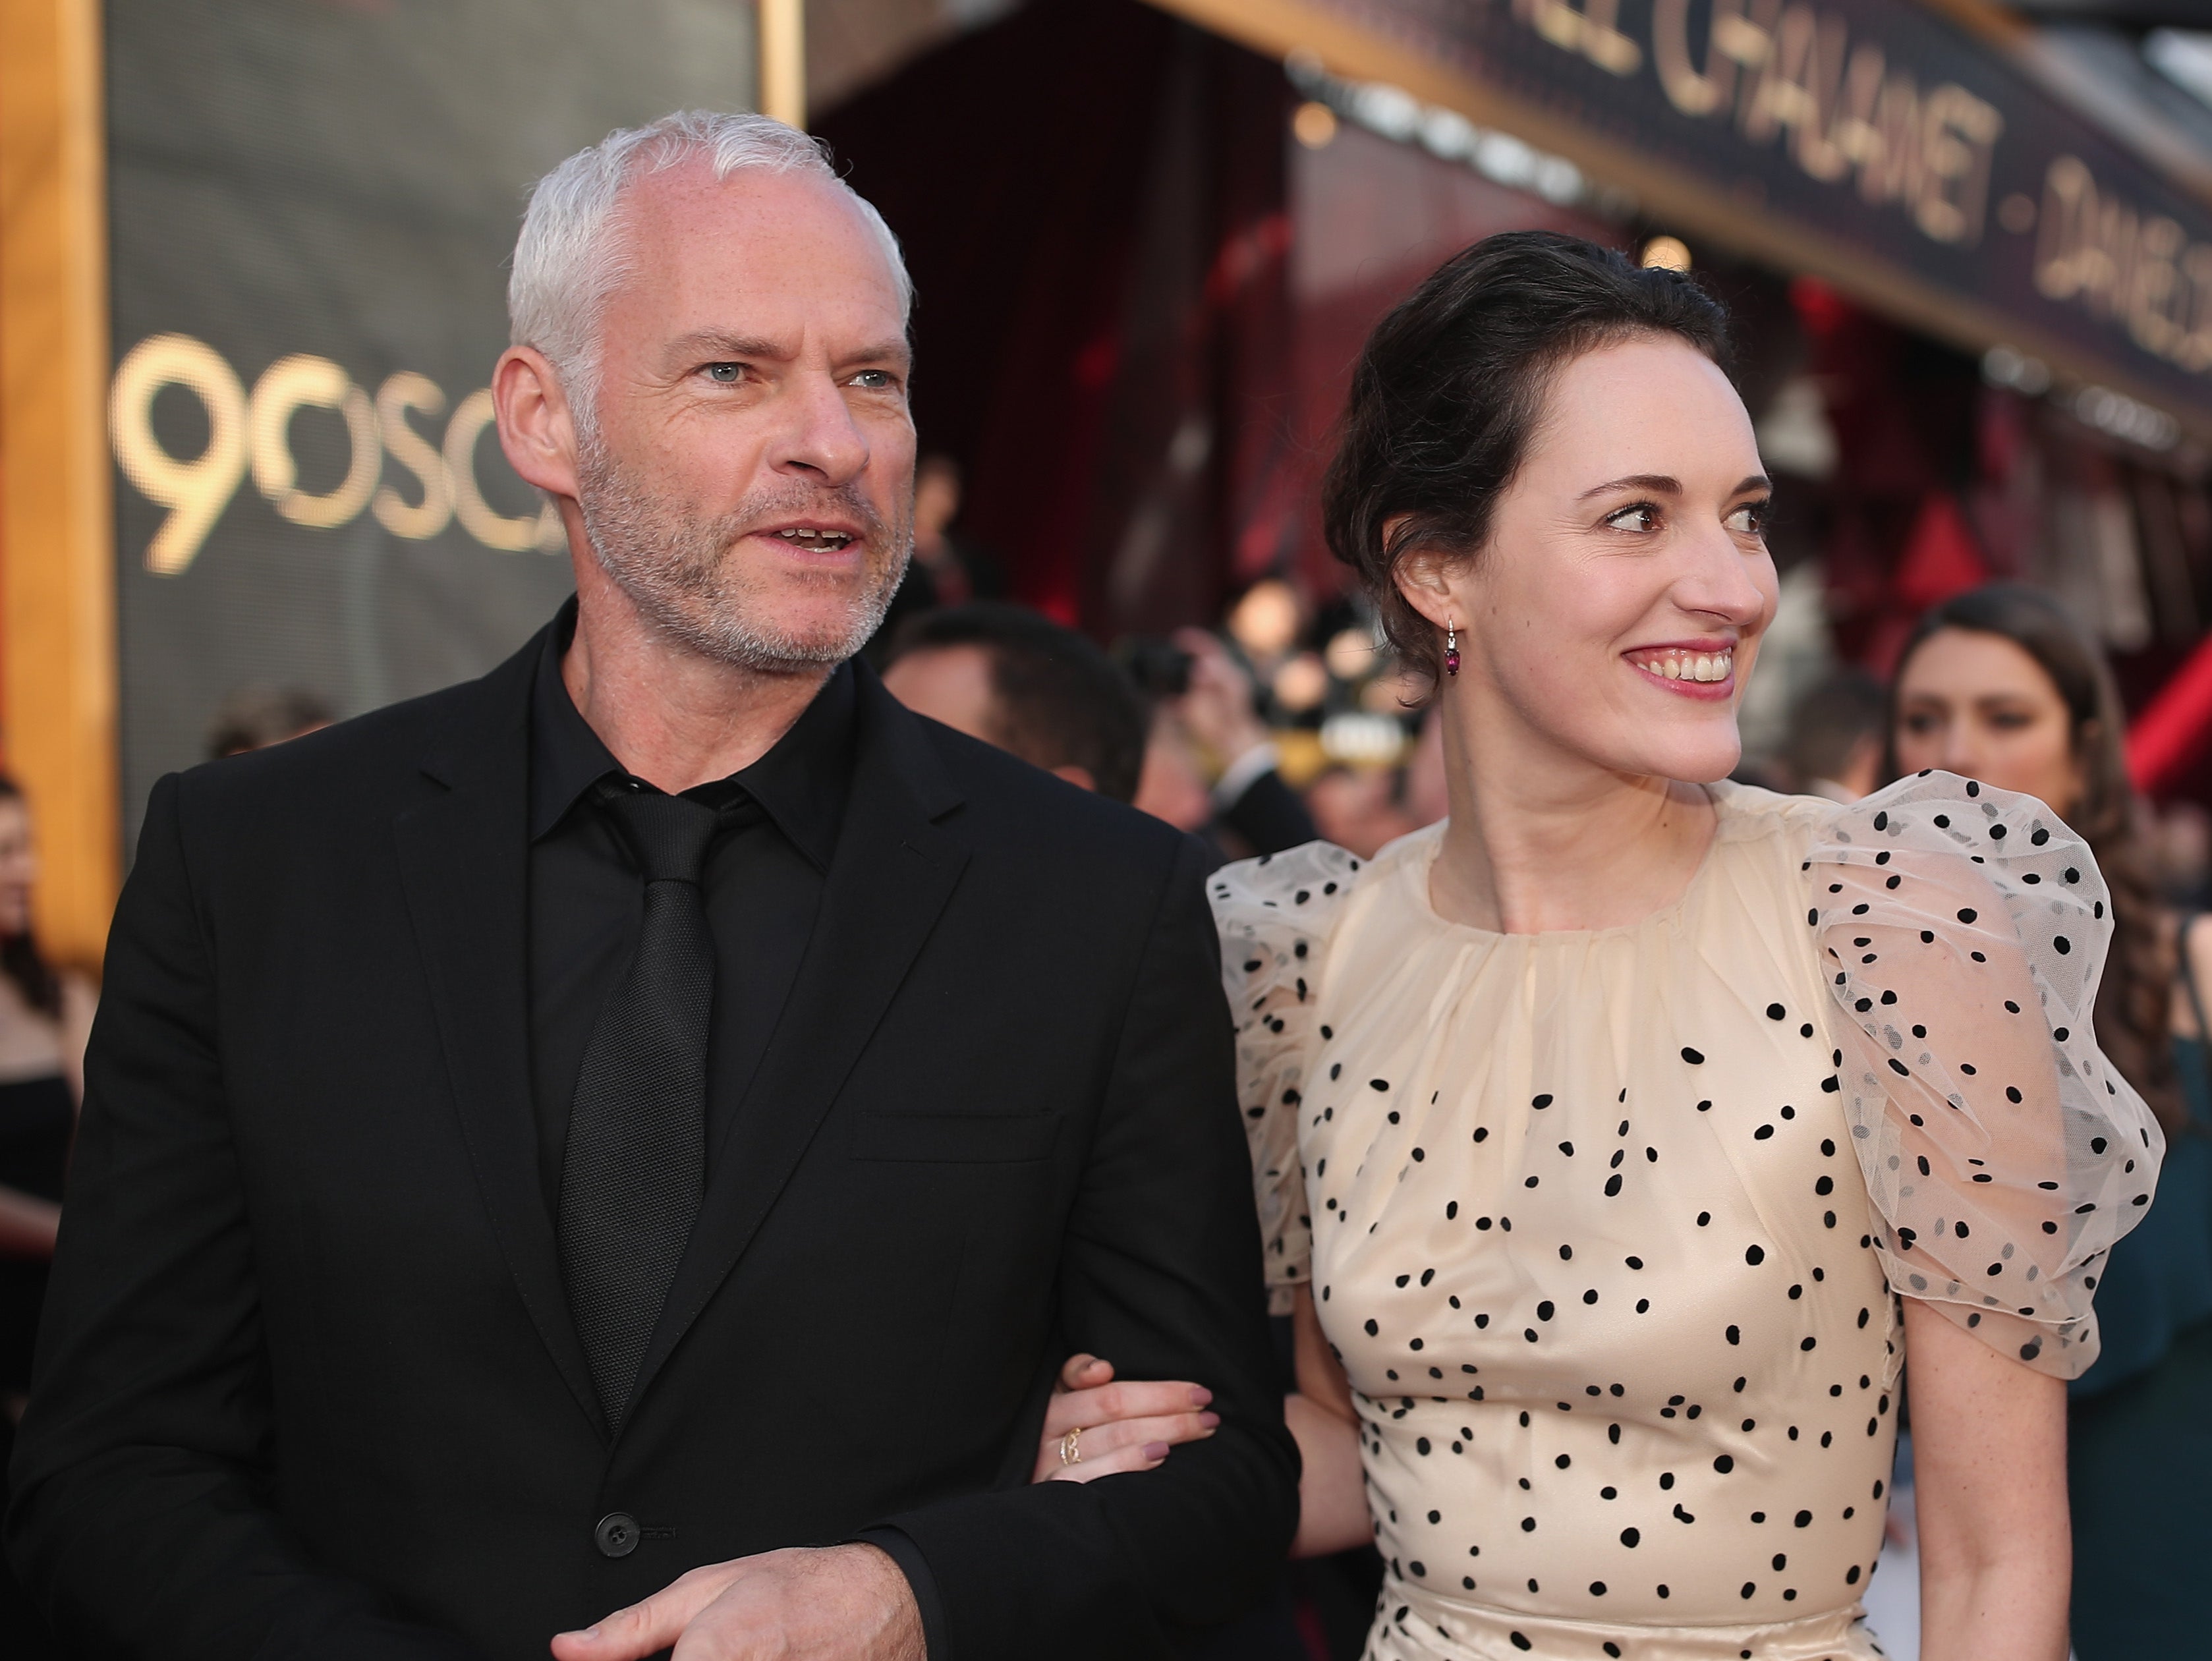 Martin McDonagh and Phoebe Waller Bridge at the 90th Annual Academy Awards in 2018